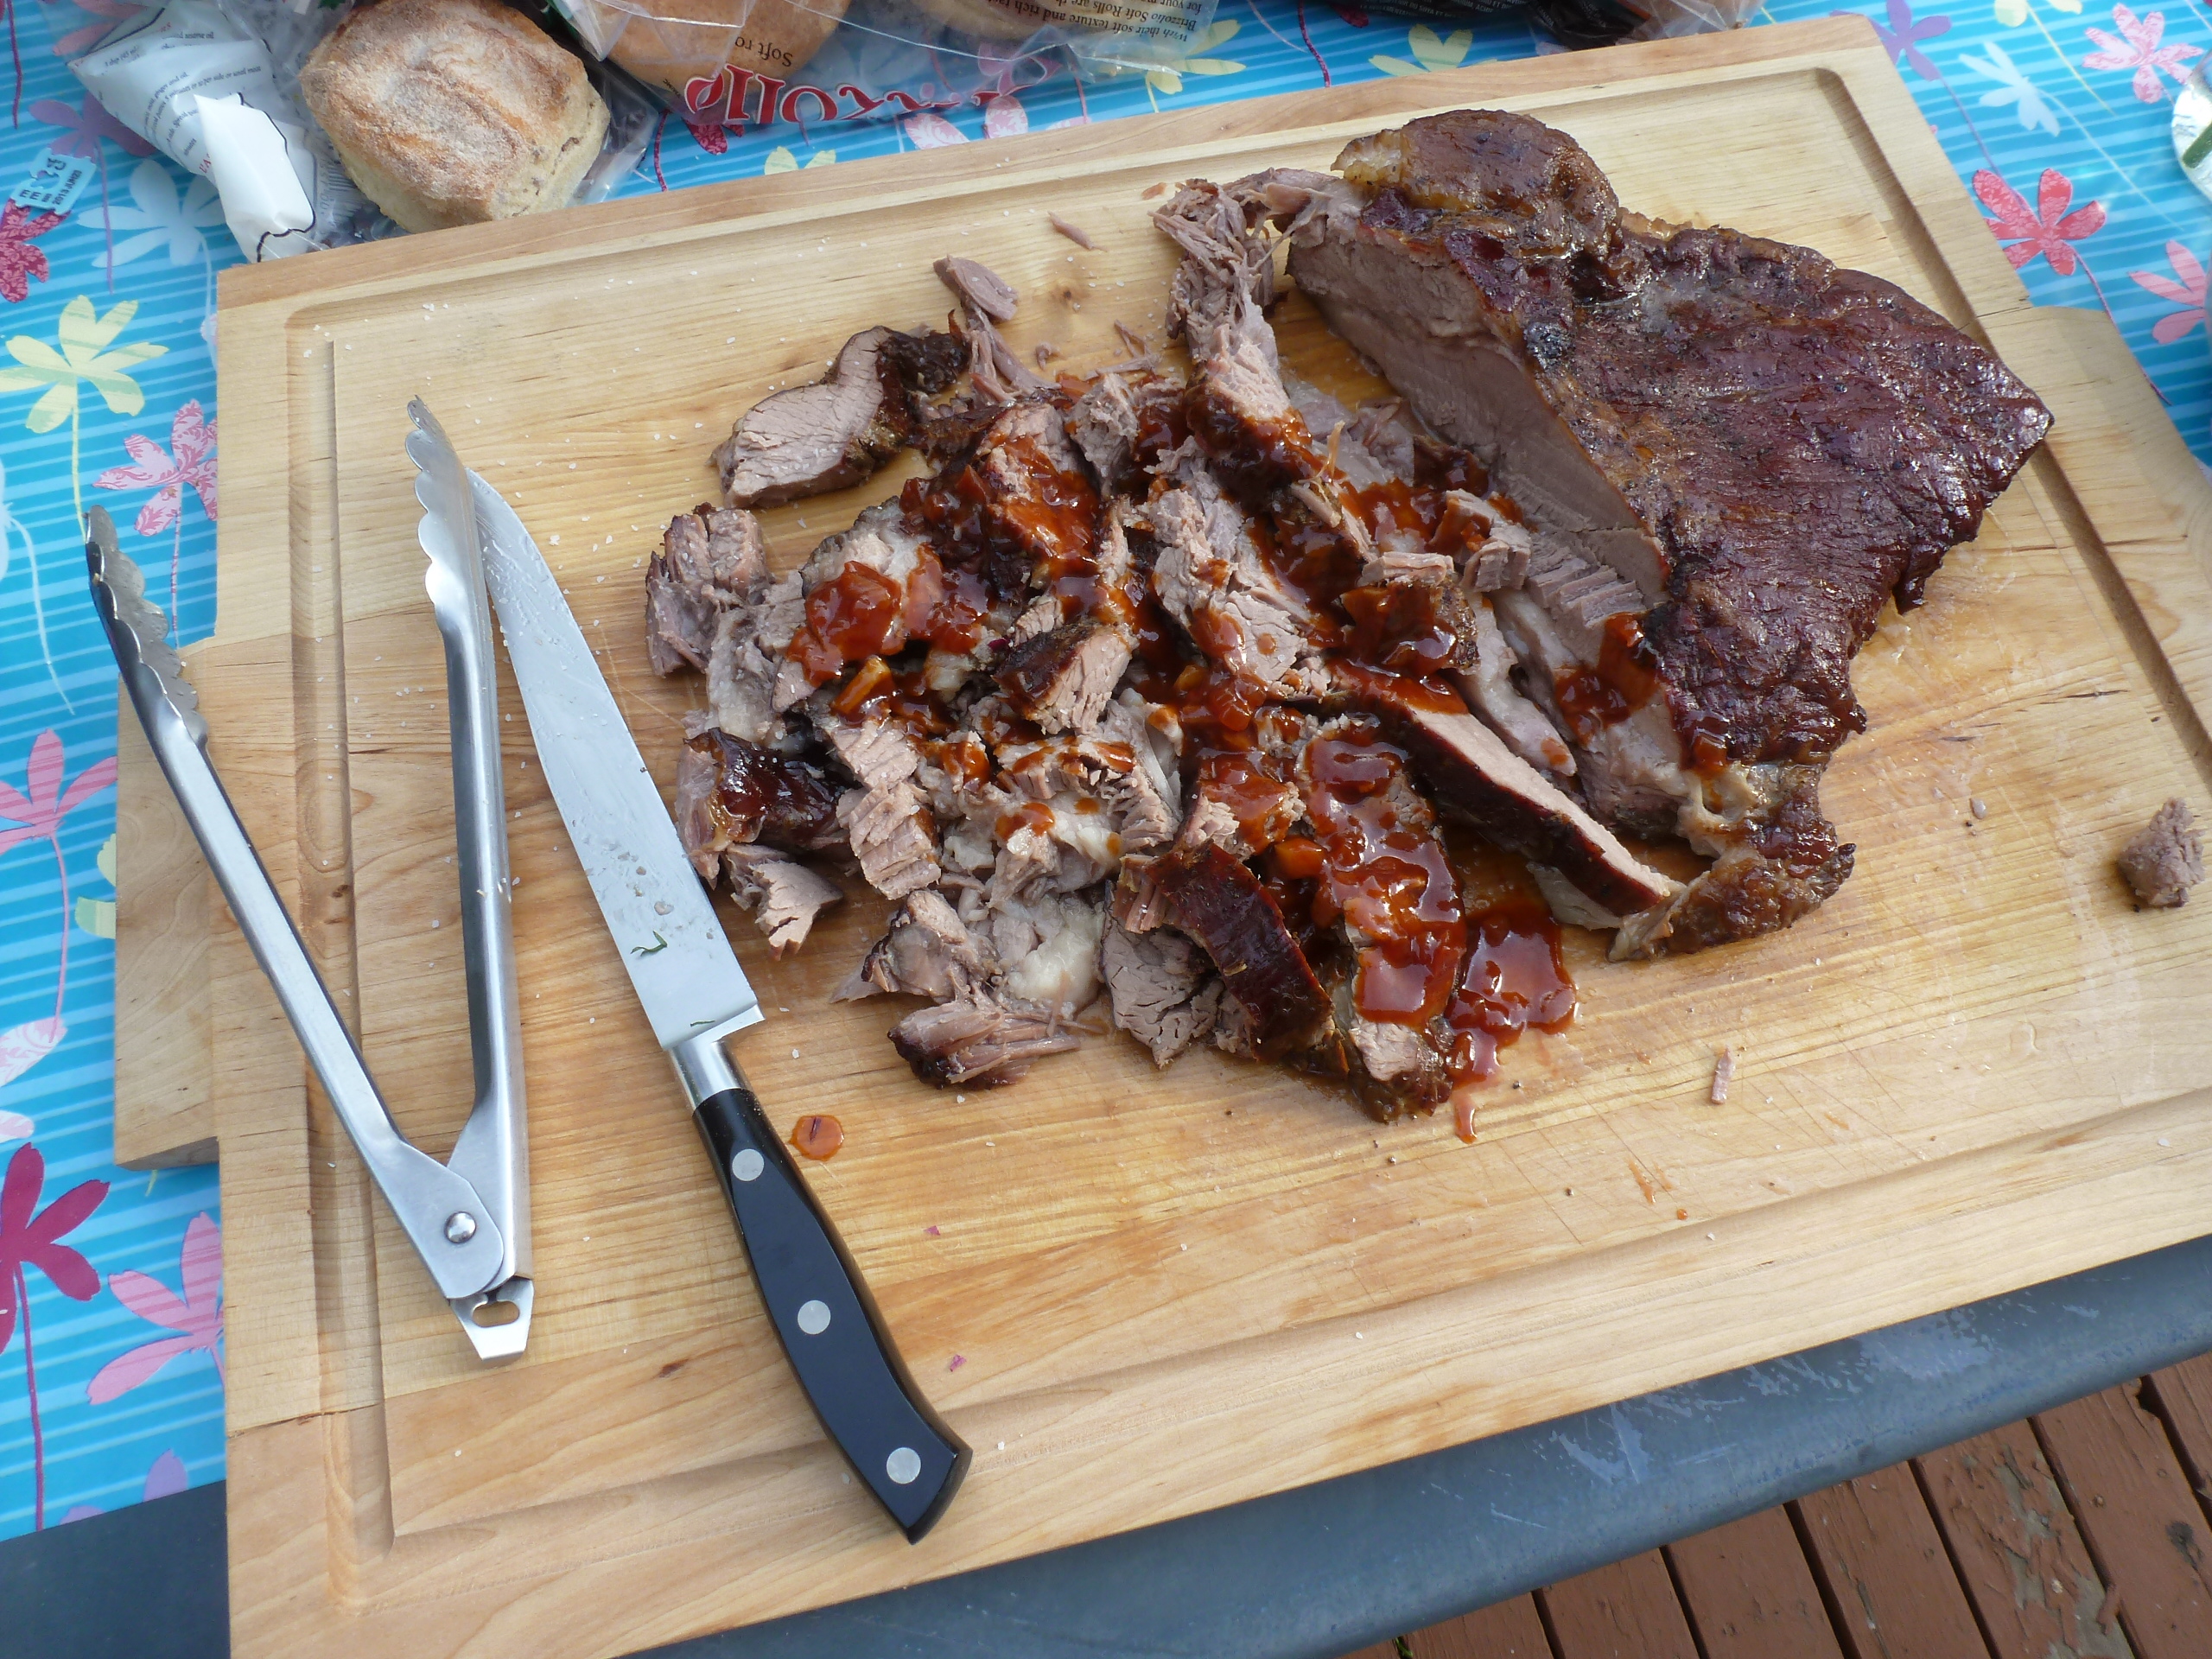 Barbecue brisket, chopped up and dress with barbecue sauce